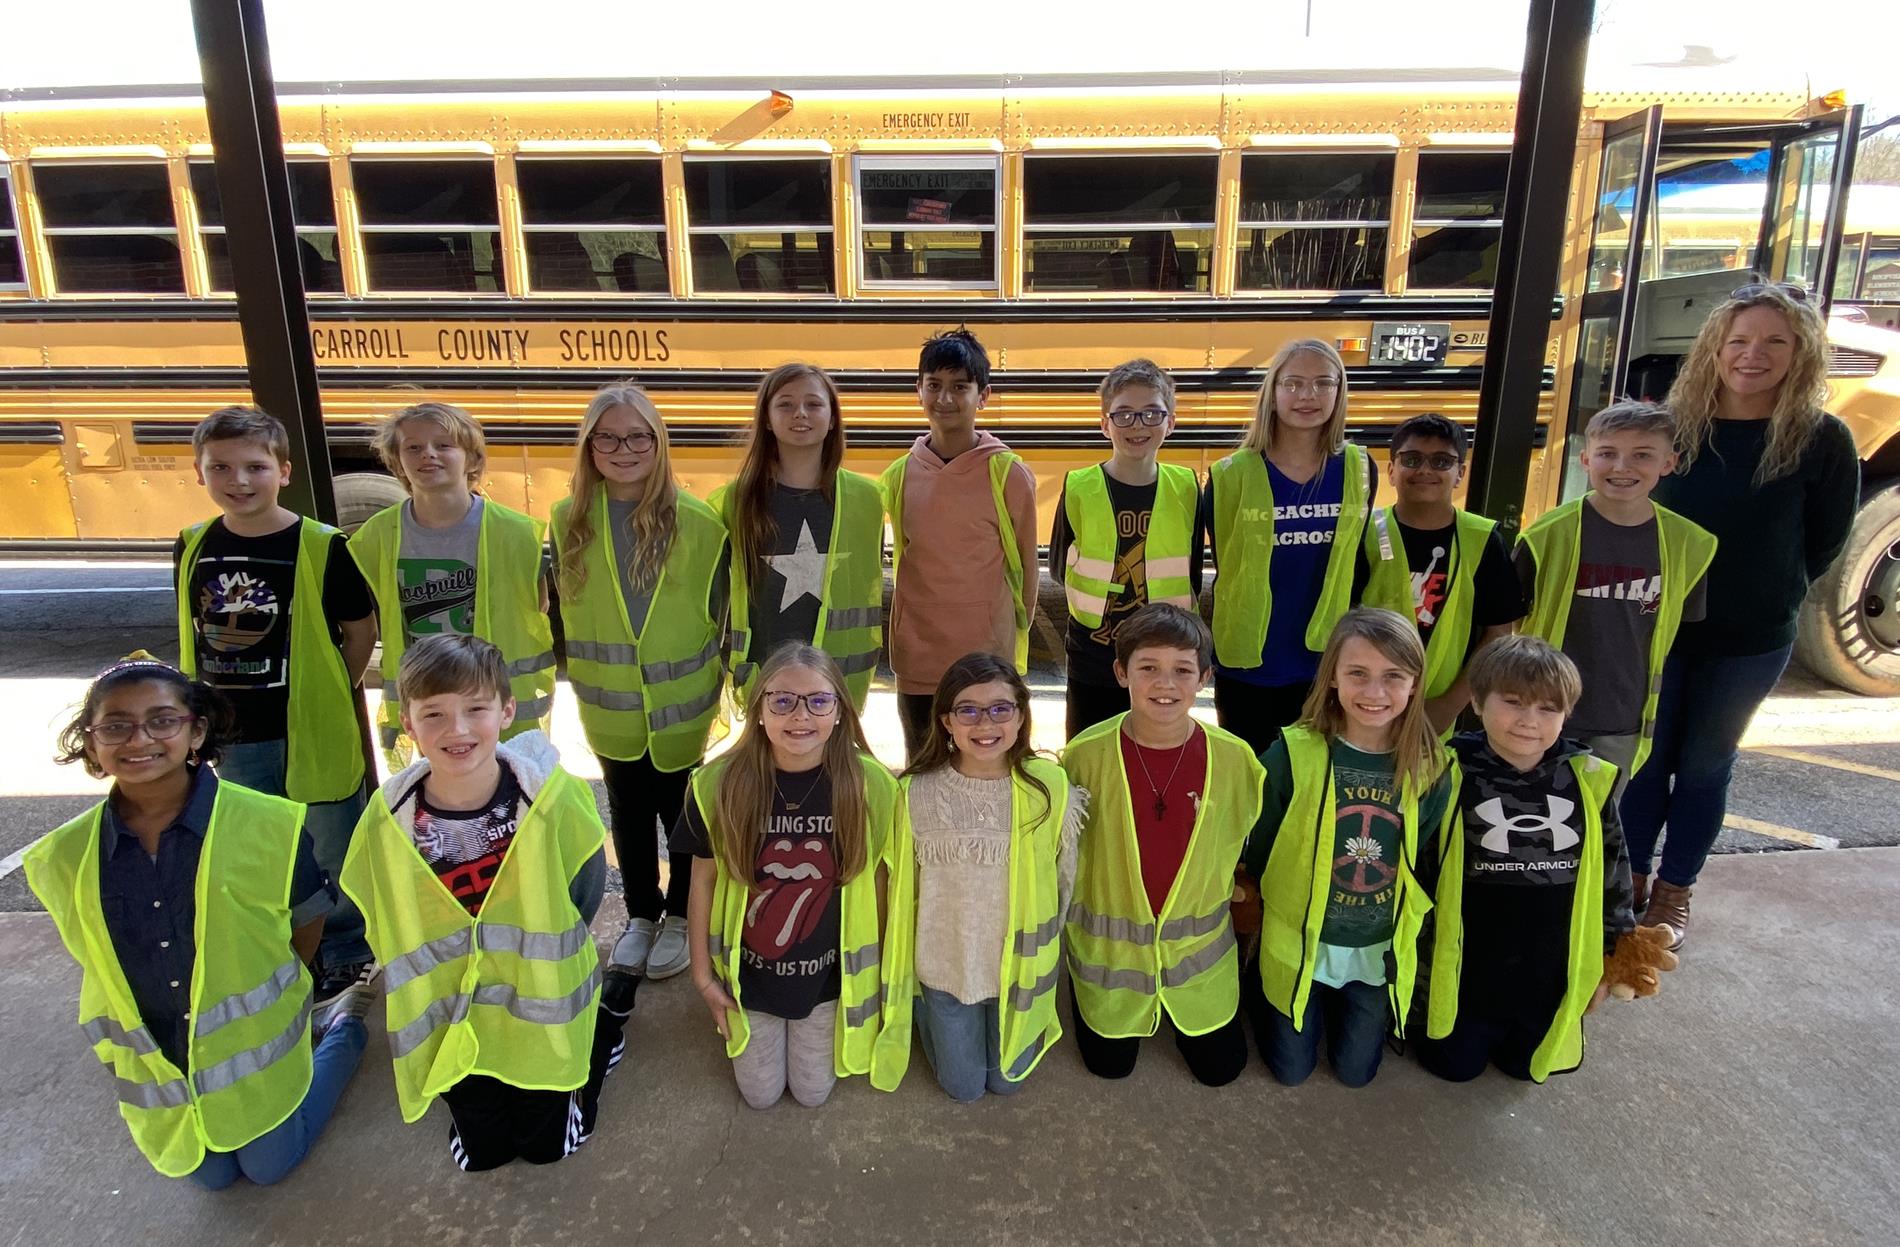 Safety patrol club in front of a school bus